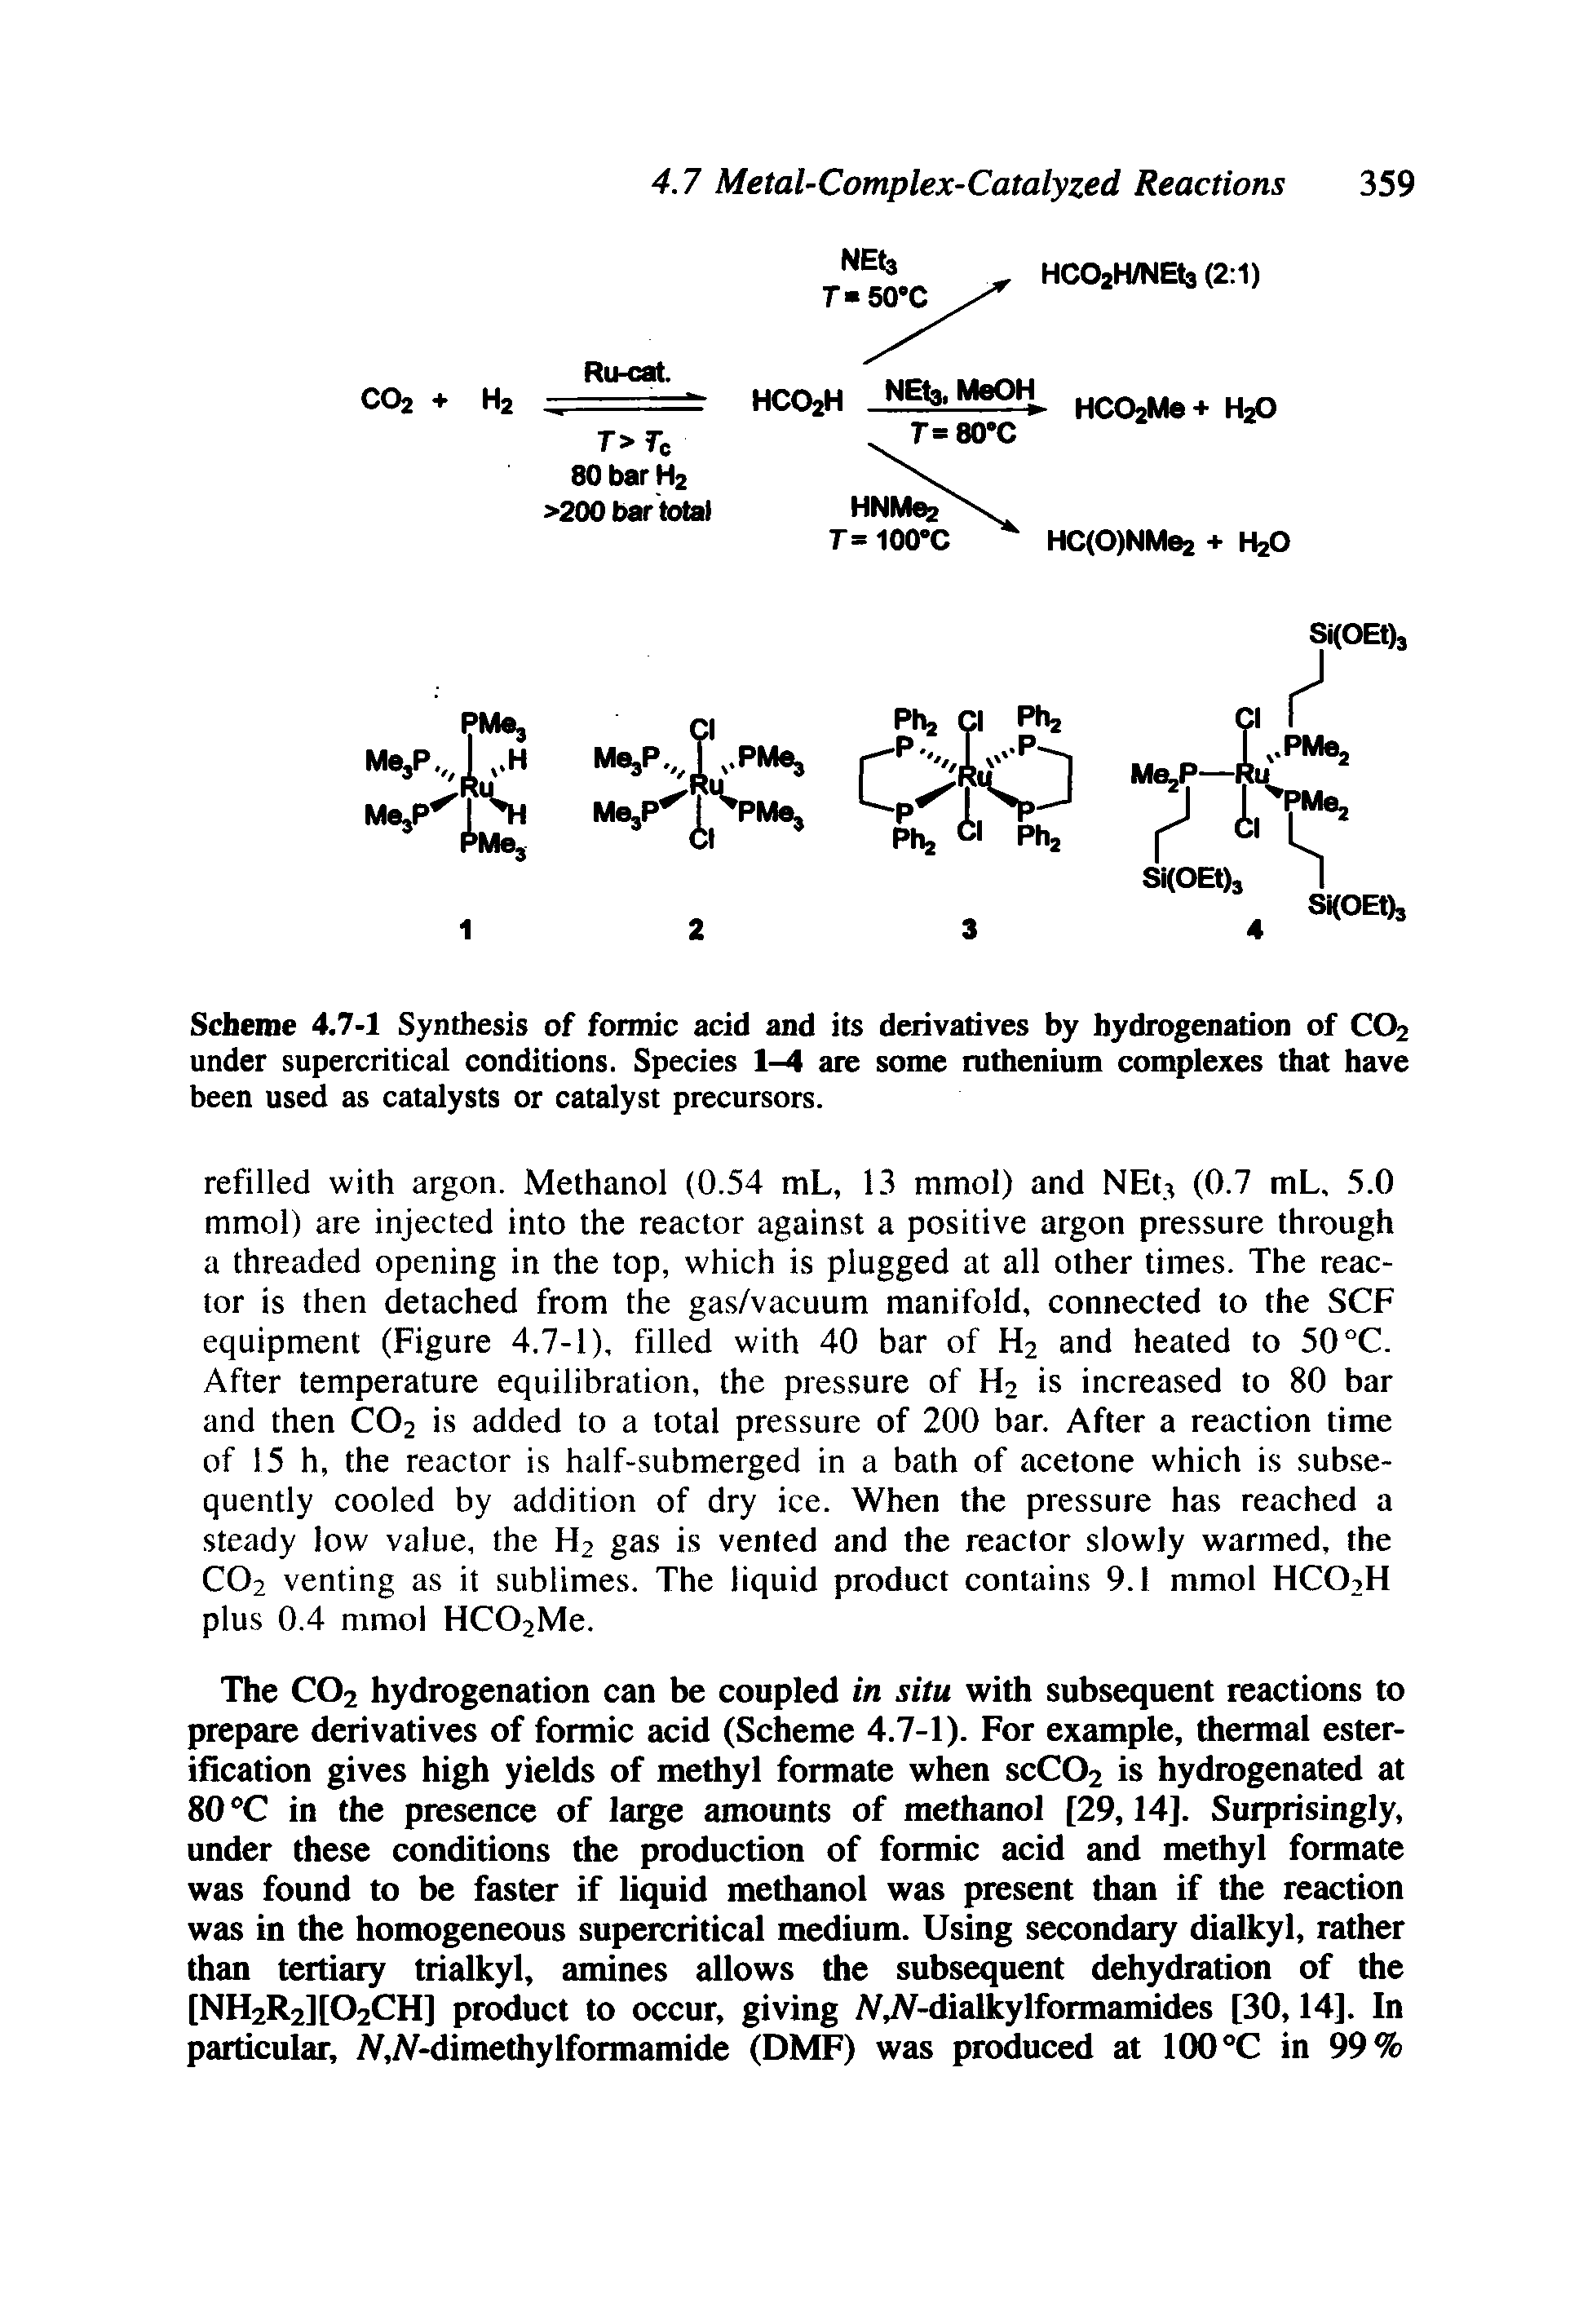 Scheme 4.7-1 Synthesis of formic acid and its derivatives by hydrogenation of CO2 under supercritical conditions. Species 1-4 are some ruthenium complexes that have been used as catalysts or catalyst precursors.